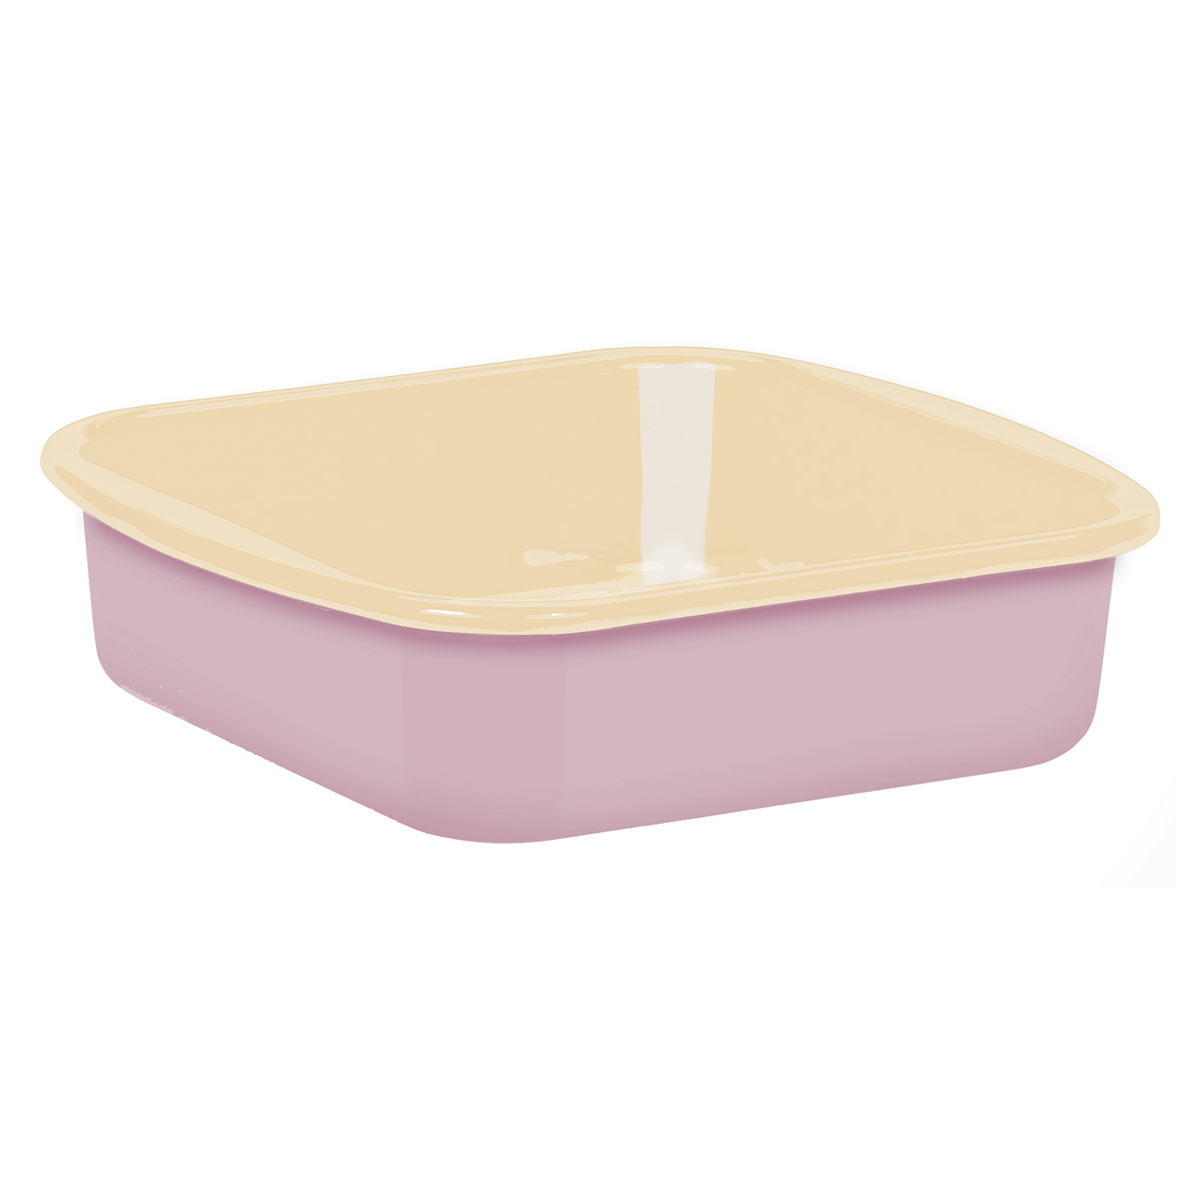 Riess Classic Bunt Pastell Mini-Backofenform 24,8x20 cm rosa - Emaille